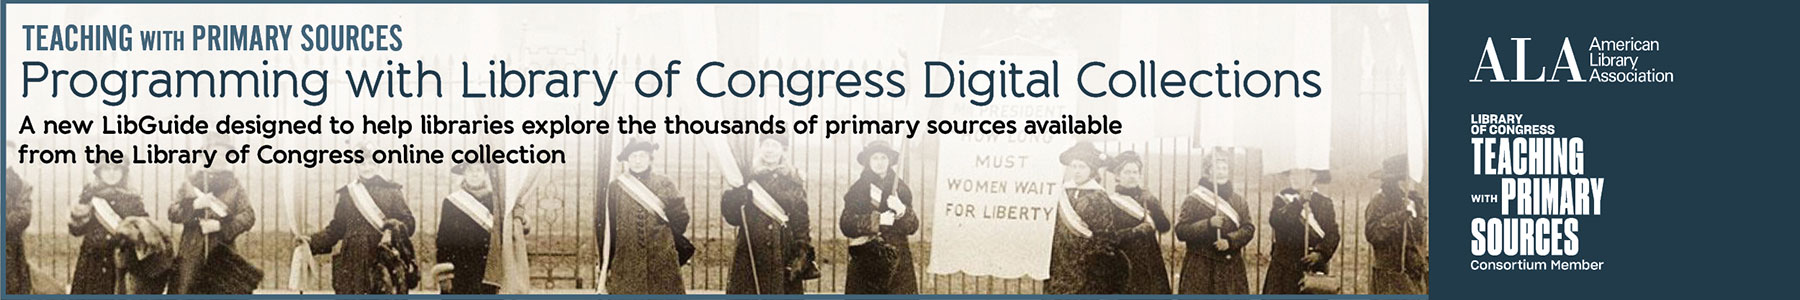 Teaching with Primary Sources: Programming with Library of Congress Digital Collections. A new LibGuide designed to help libraries explore the thousands of primary sources available from the Library of Congress online collection. Ad from the American Library Association Public Programs Office